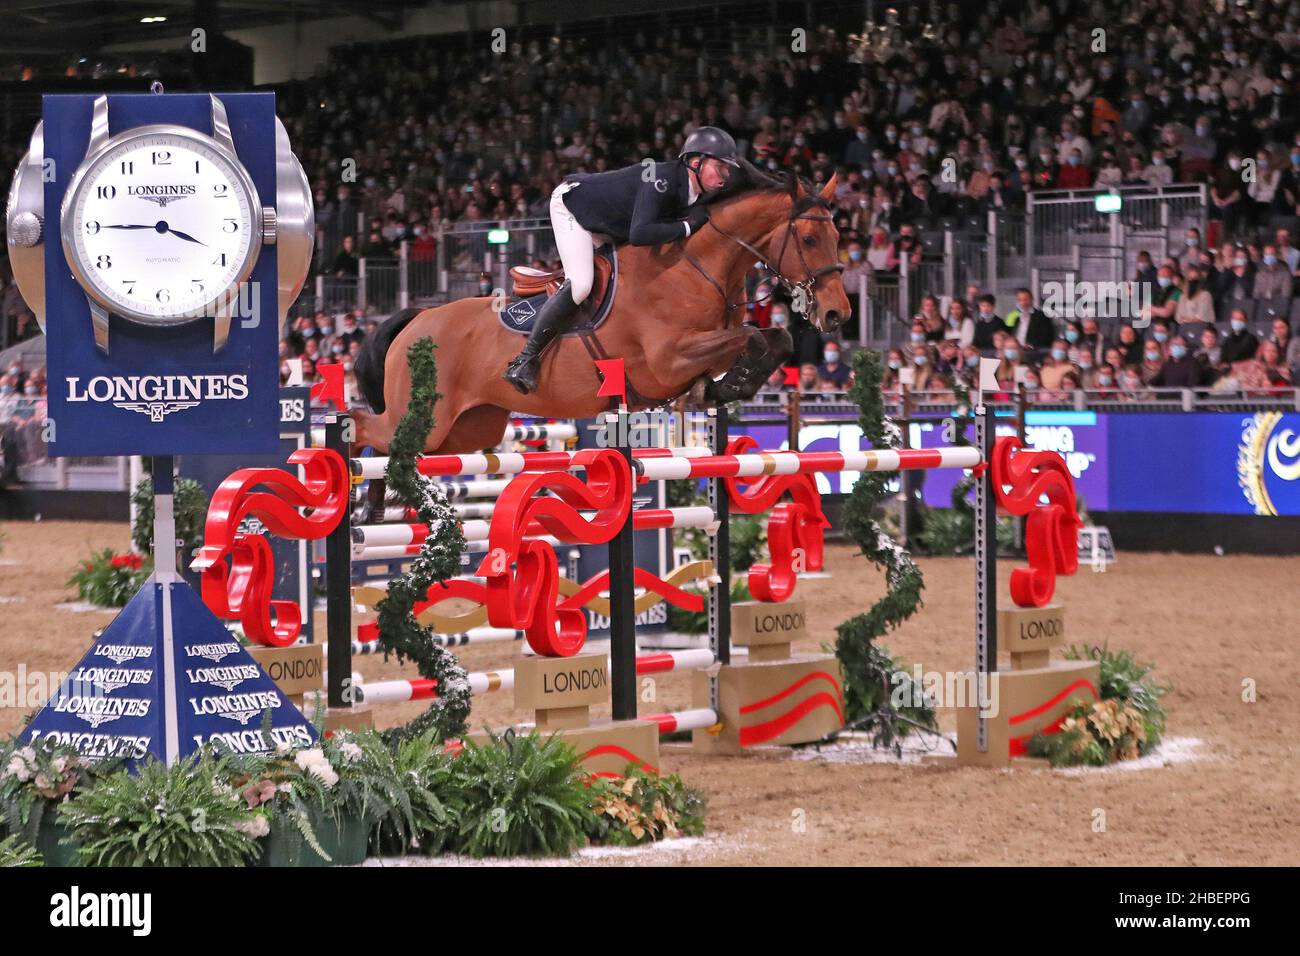 The London International Horse Show, Sunday 19th December: The Longines FEI Jumping World Cup Harry Charles riding Stardust wins The Longines FEI Jumping World Cup Stock Photo